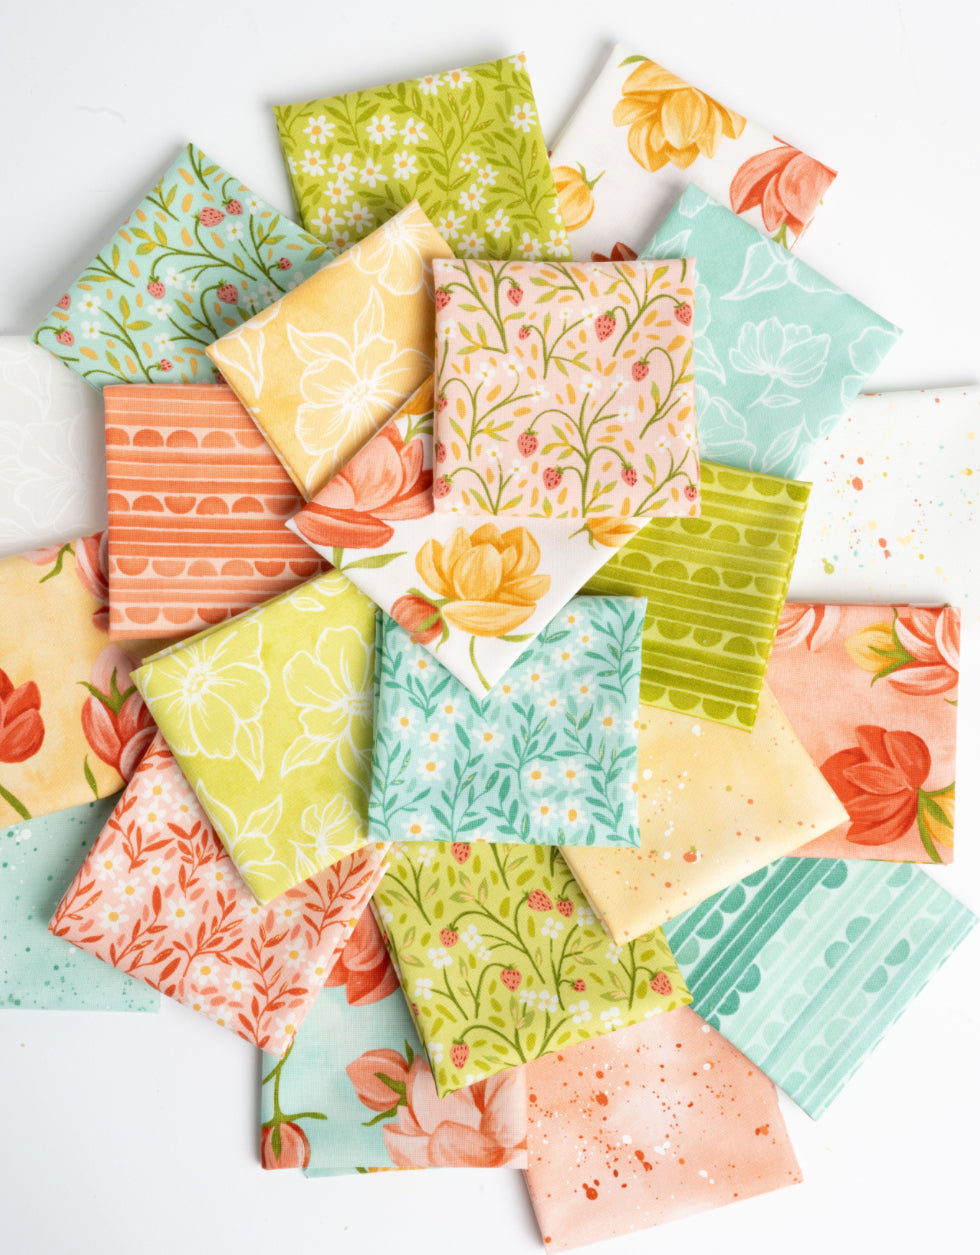 Kindred by 1 Canoe 2 : Pack Fat Quarter